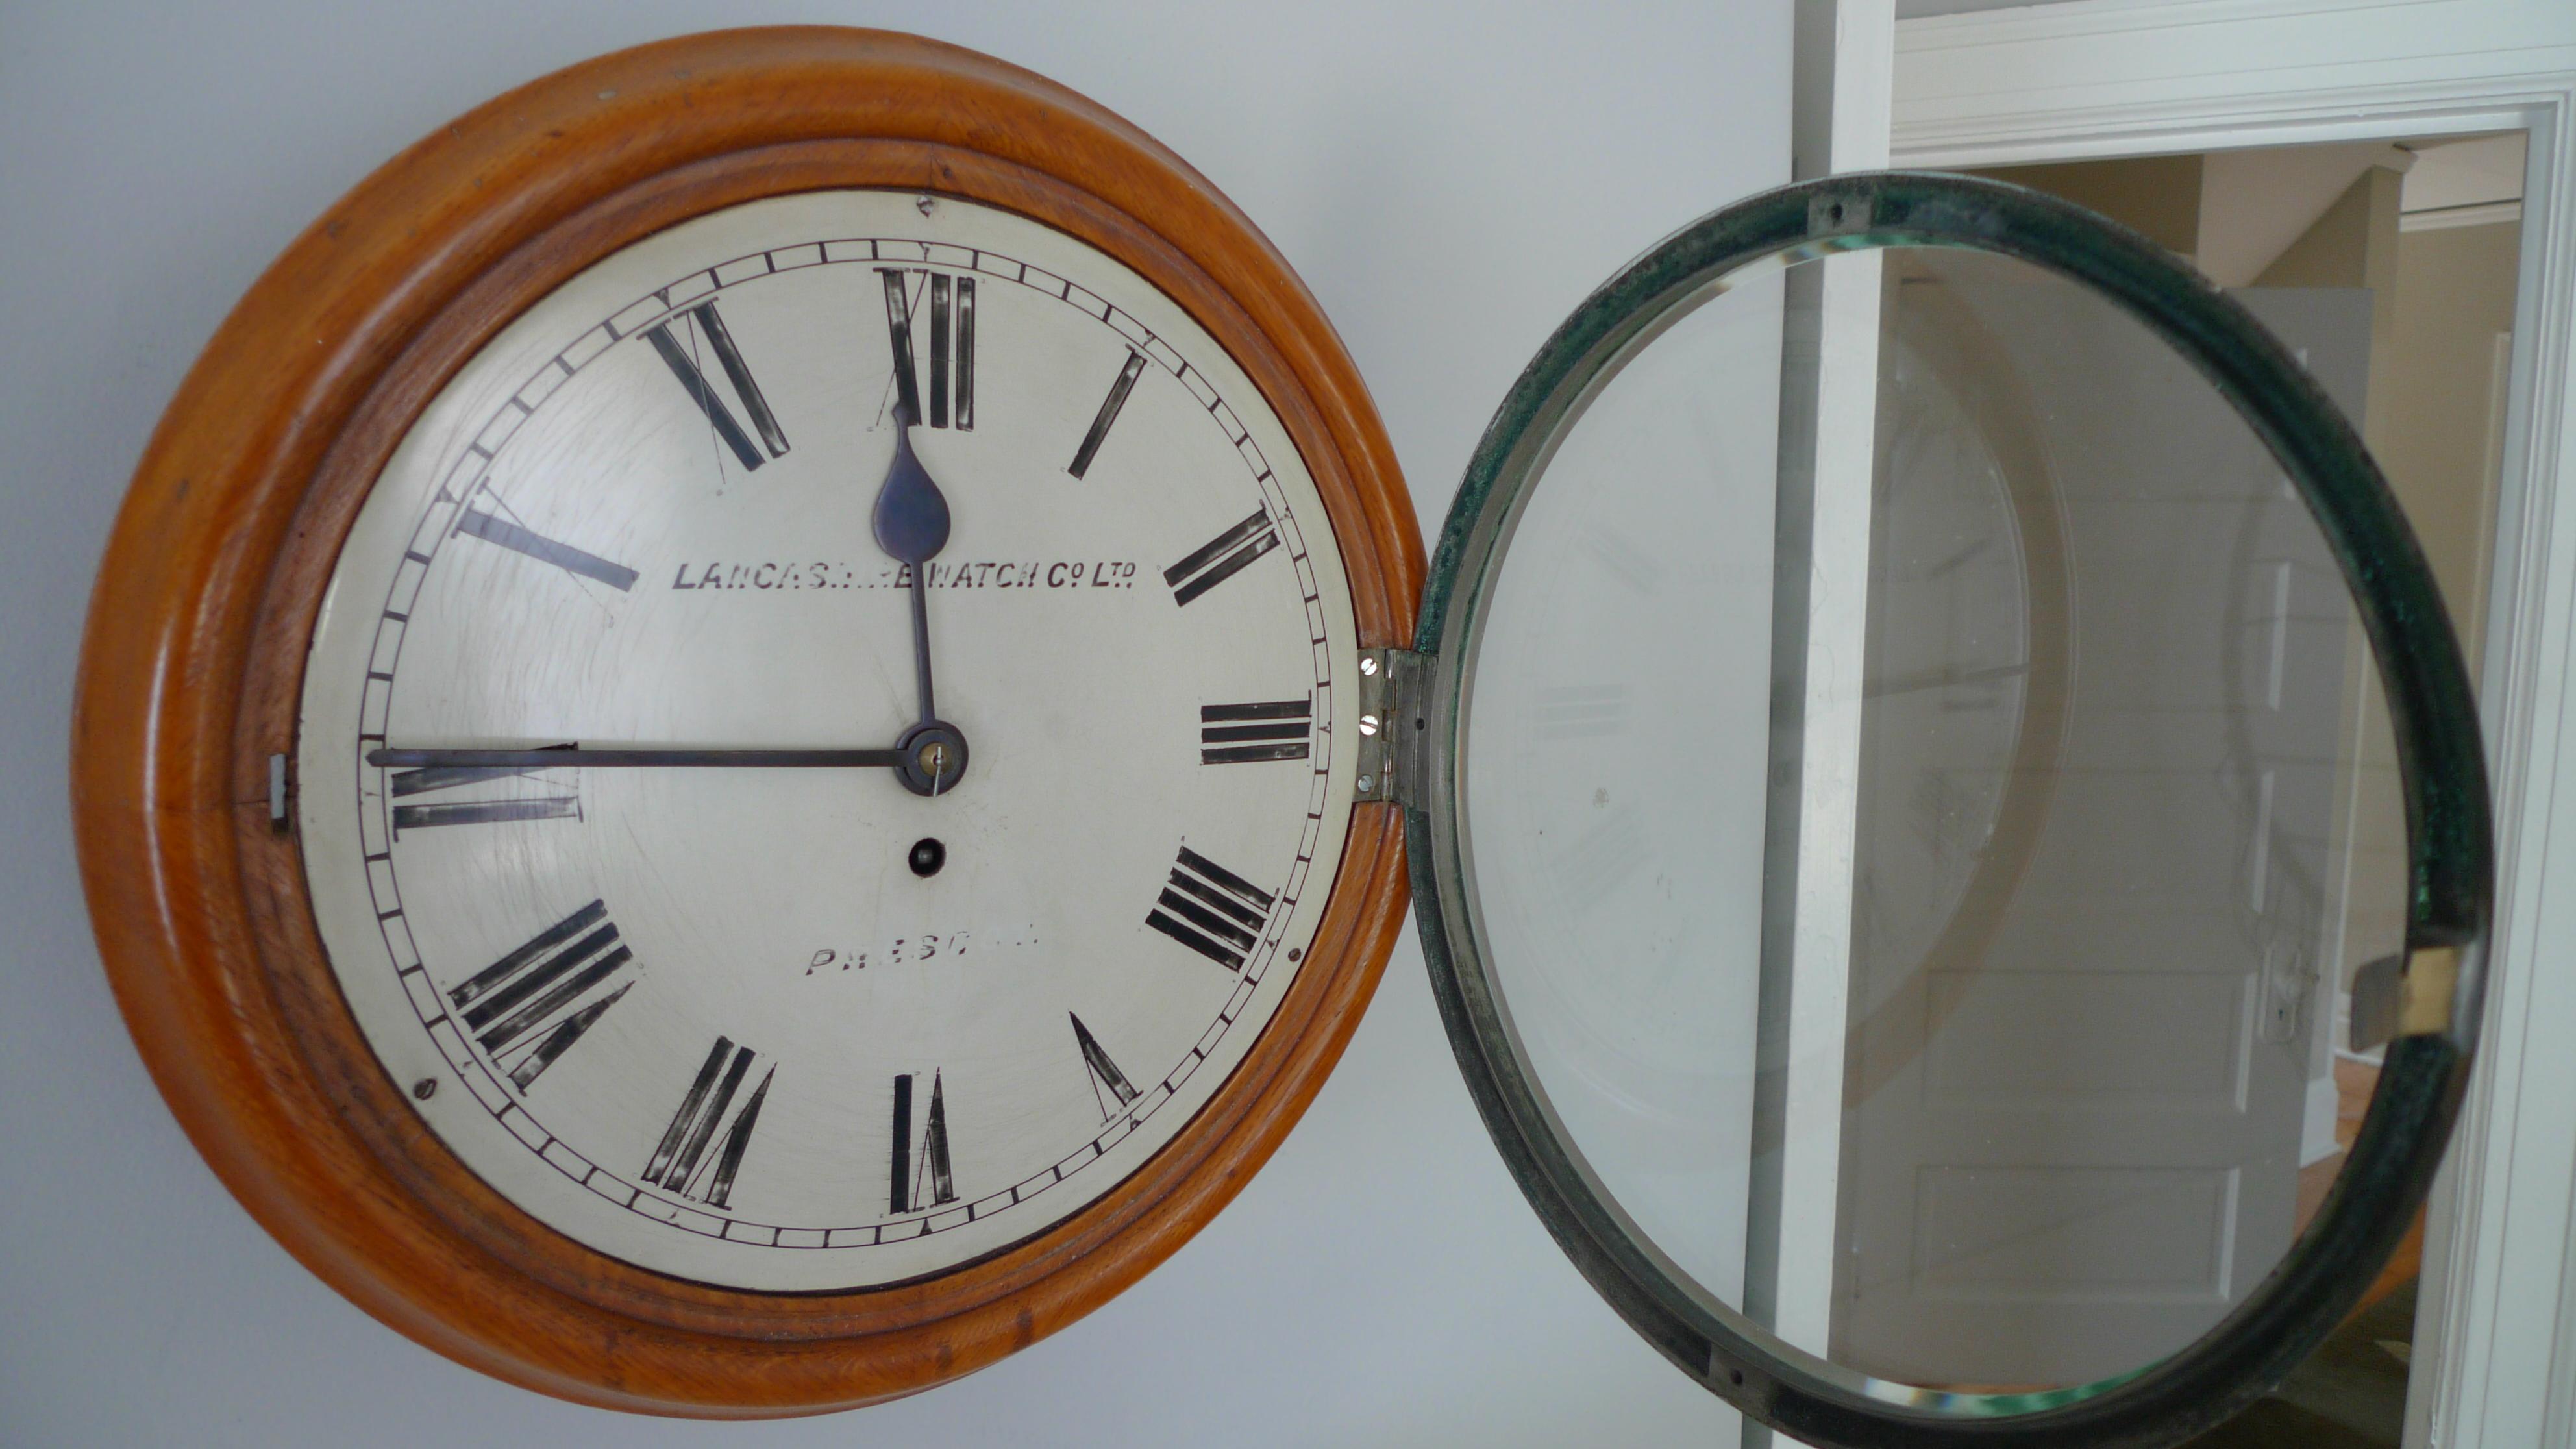 Victorian Wall clock by Lancashire Watch Co. from rail station, late 19th cent. Ships free For Sale